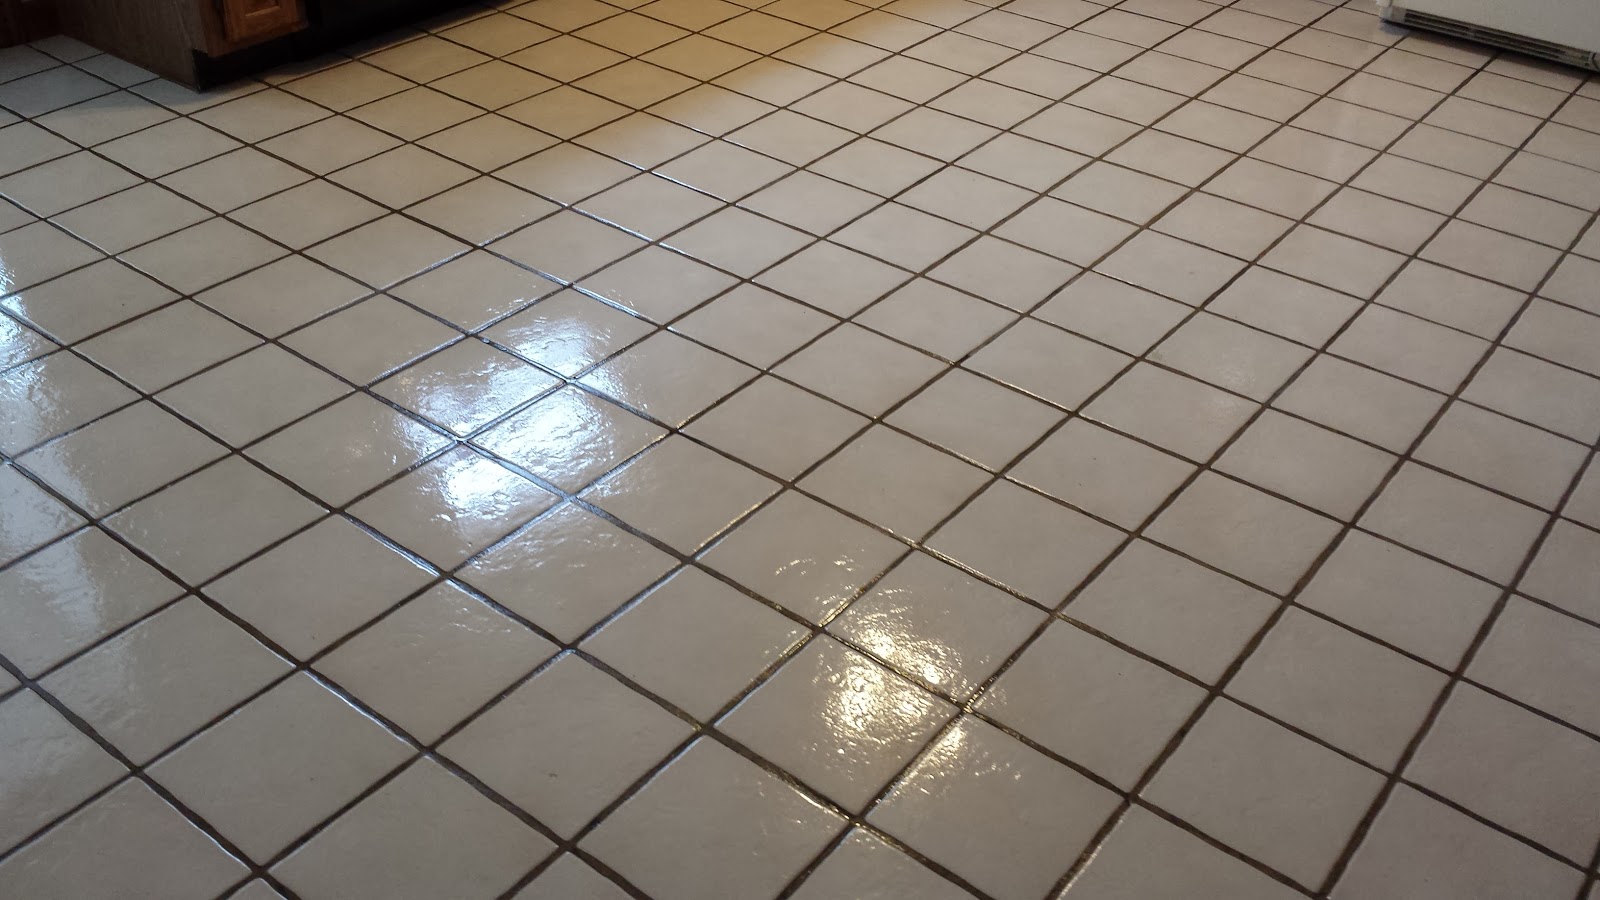 the still wet floor that inspired this thought